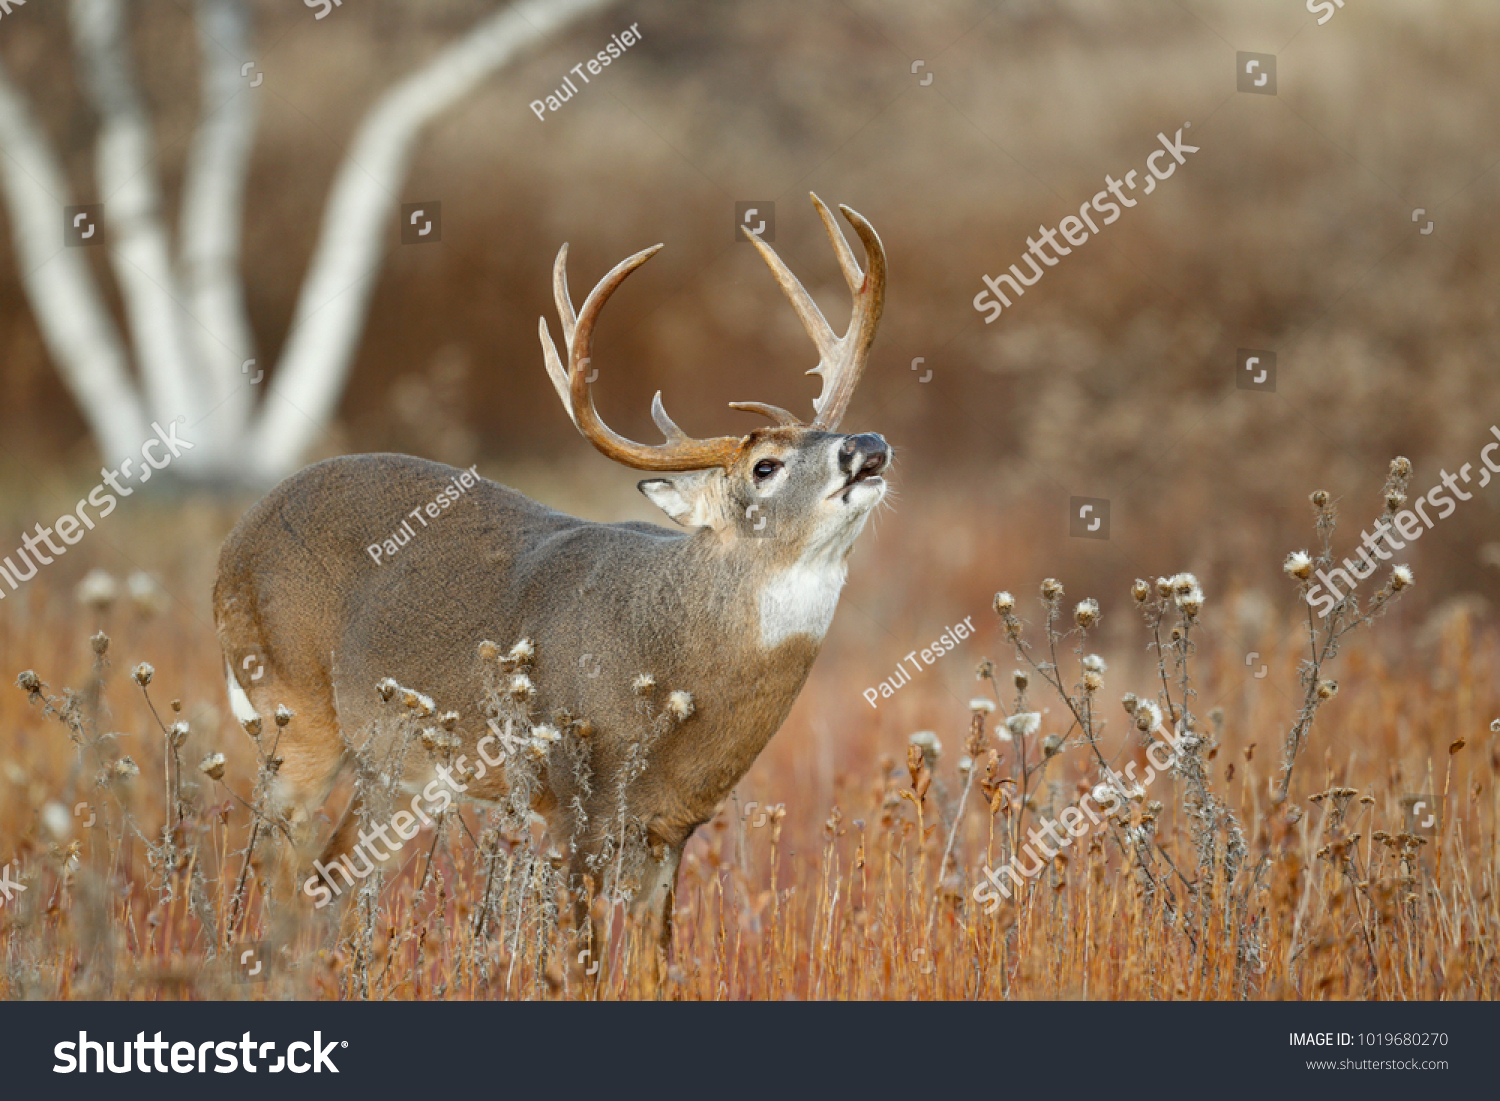 A white-tailed deer standing in a meadow lip curling #1019680270